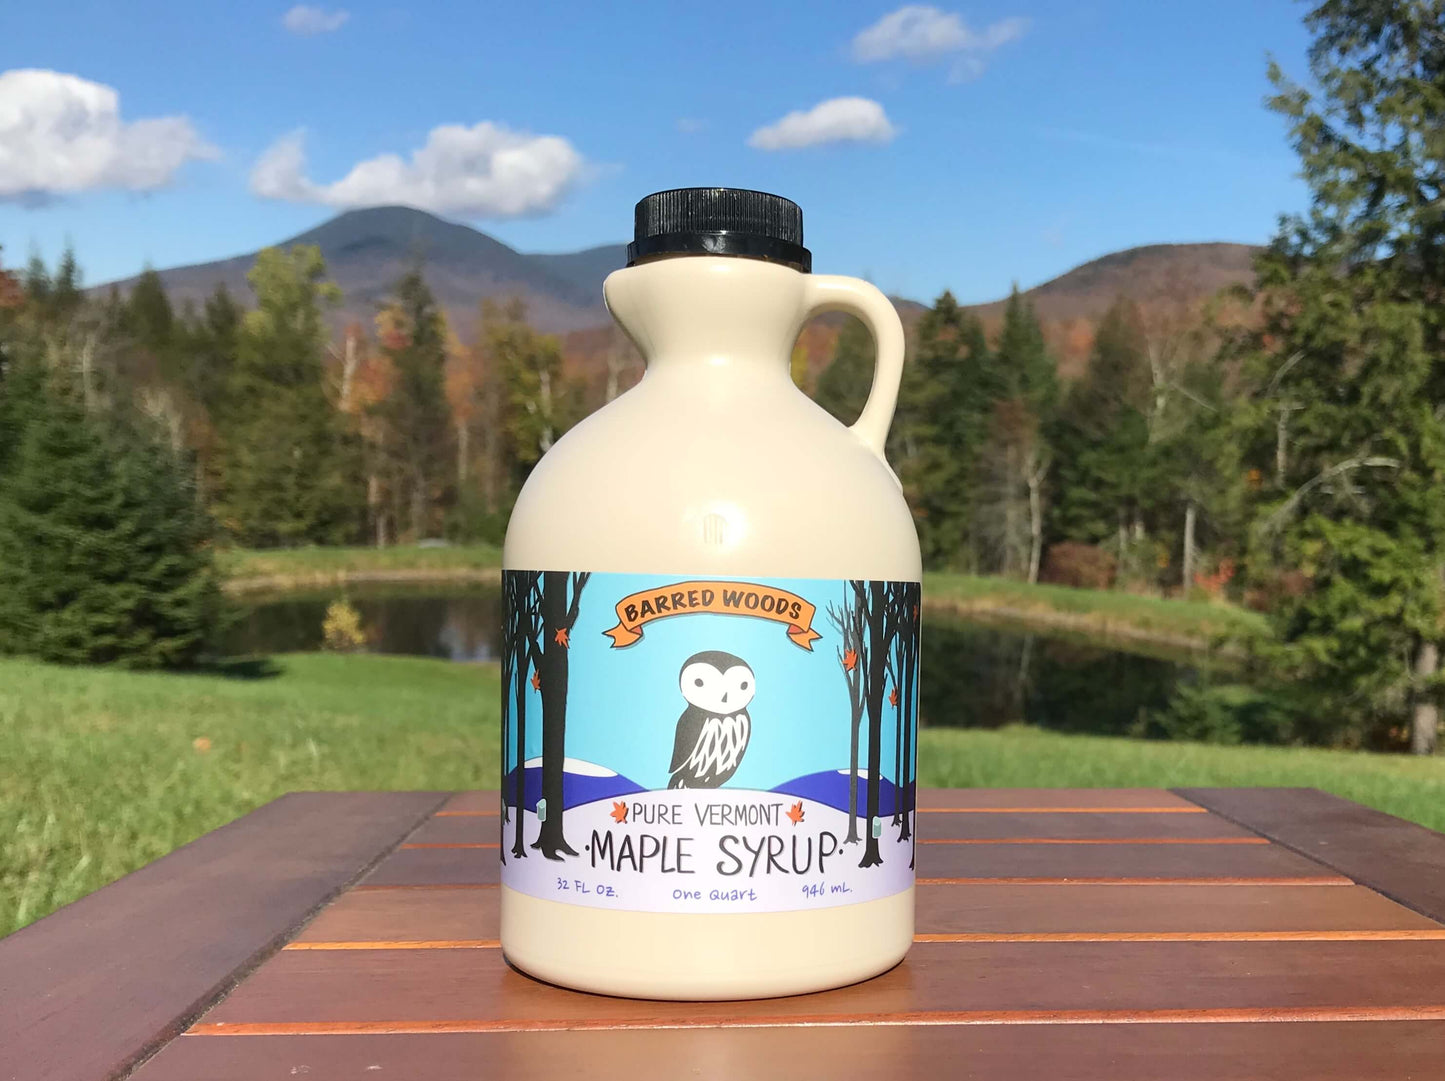 Pure Vermont Maple Syrup - Quart Jug (32 ounces) - Barred Woods Maple